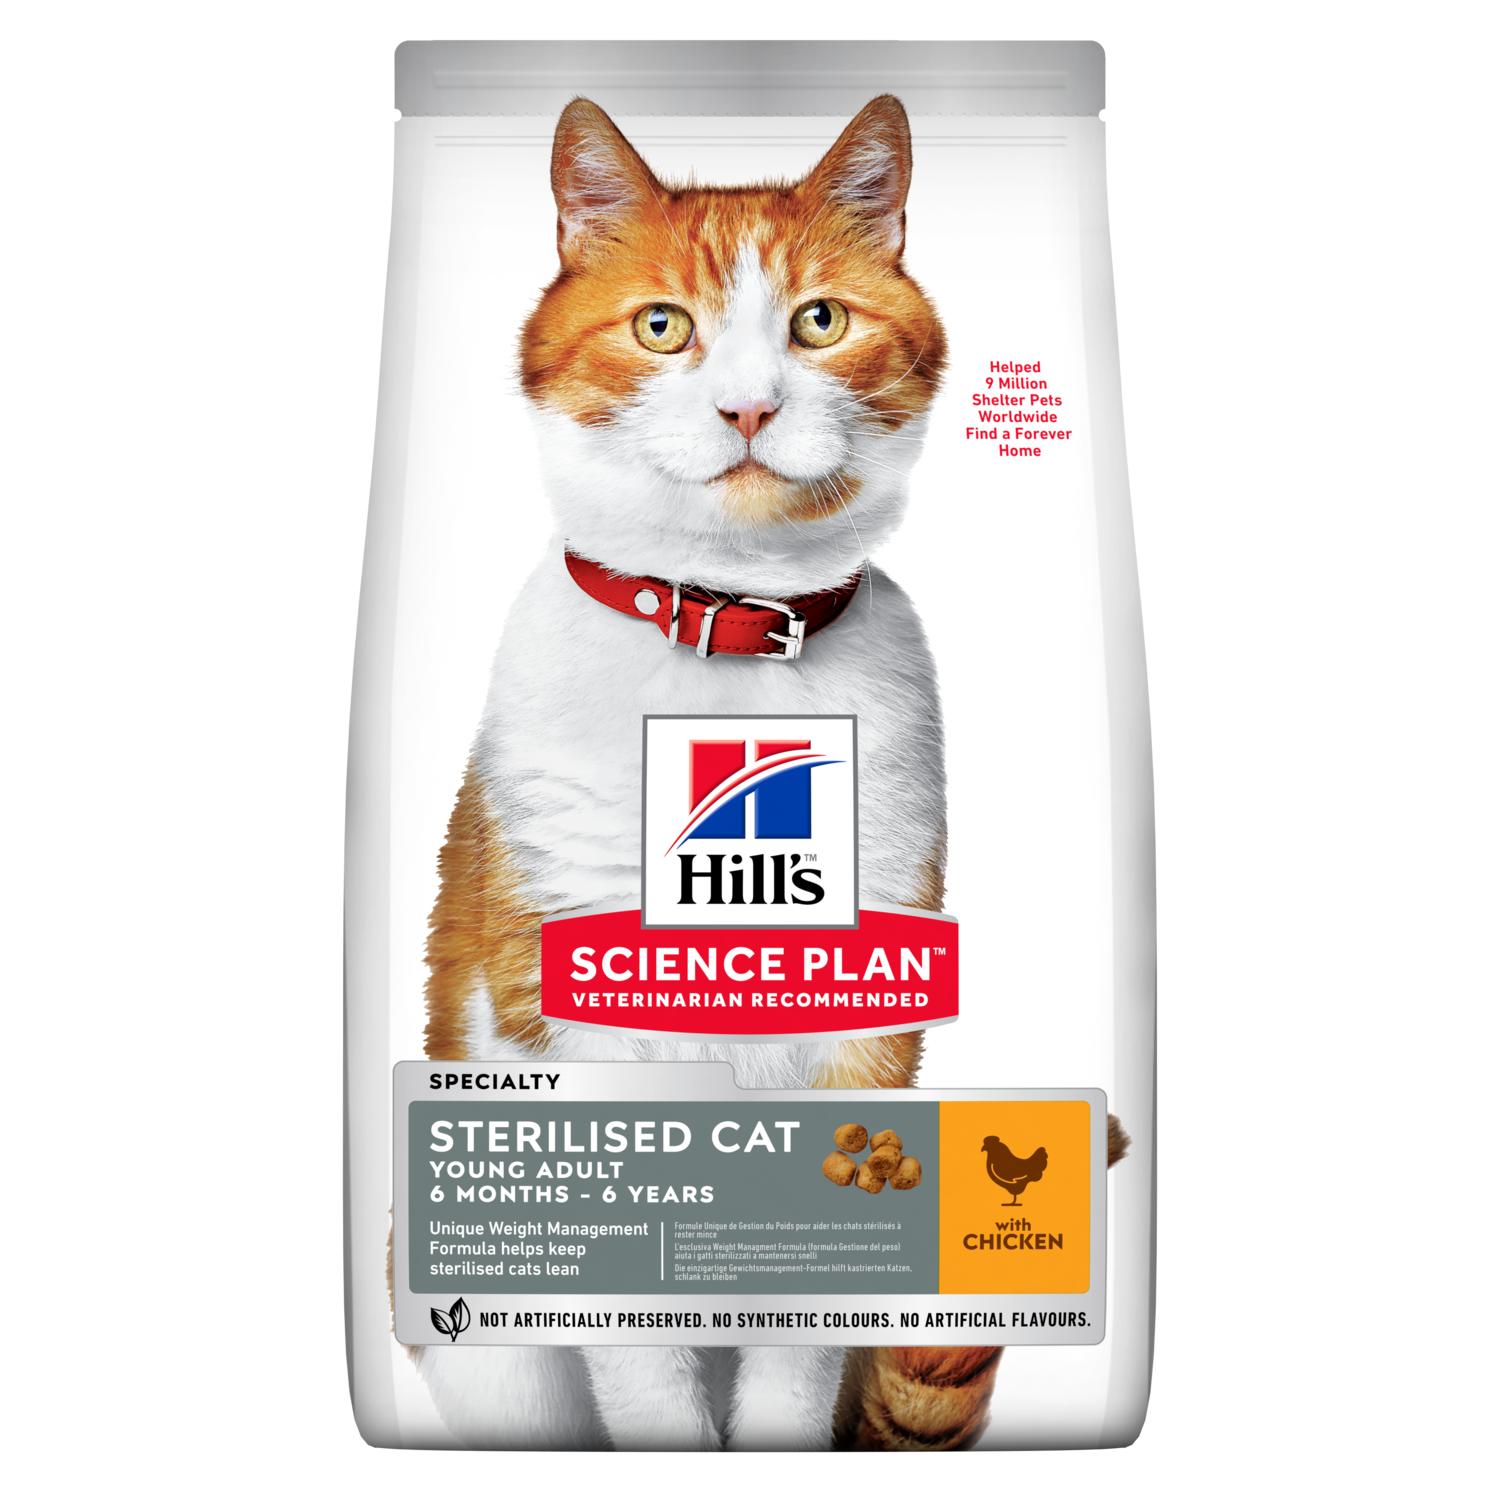 Hill's Science Plan Feline Young Adult Sterilised Cat Chicken